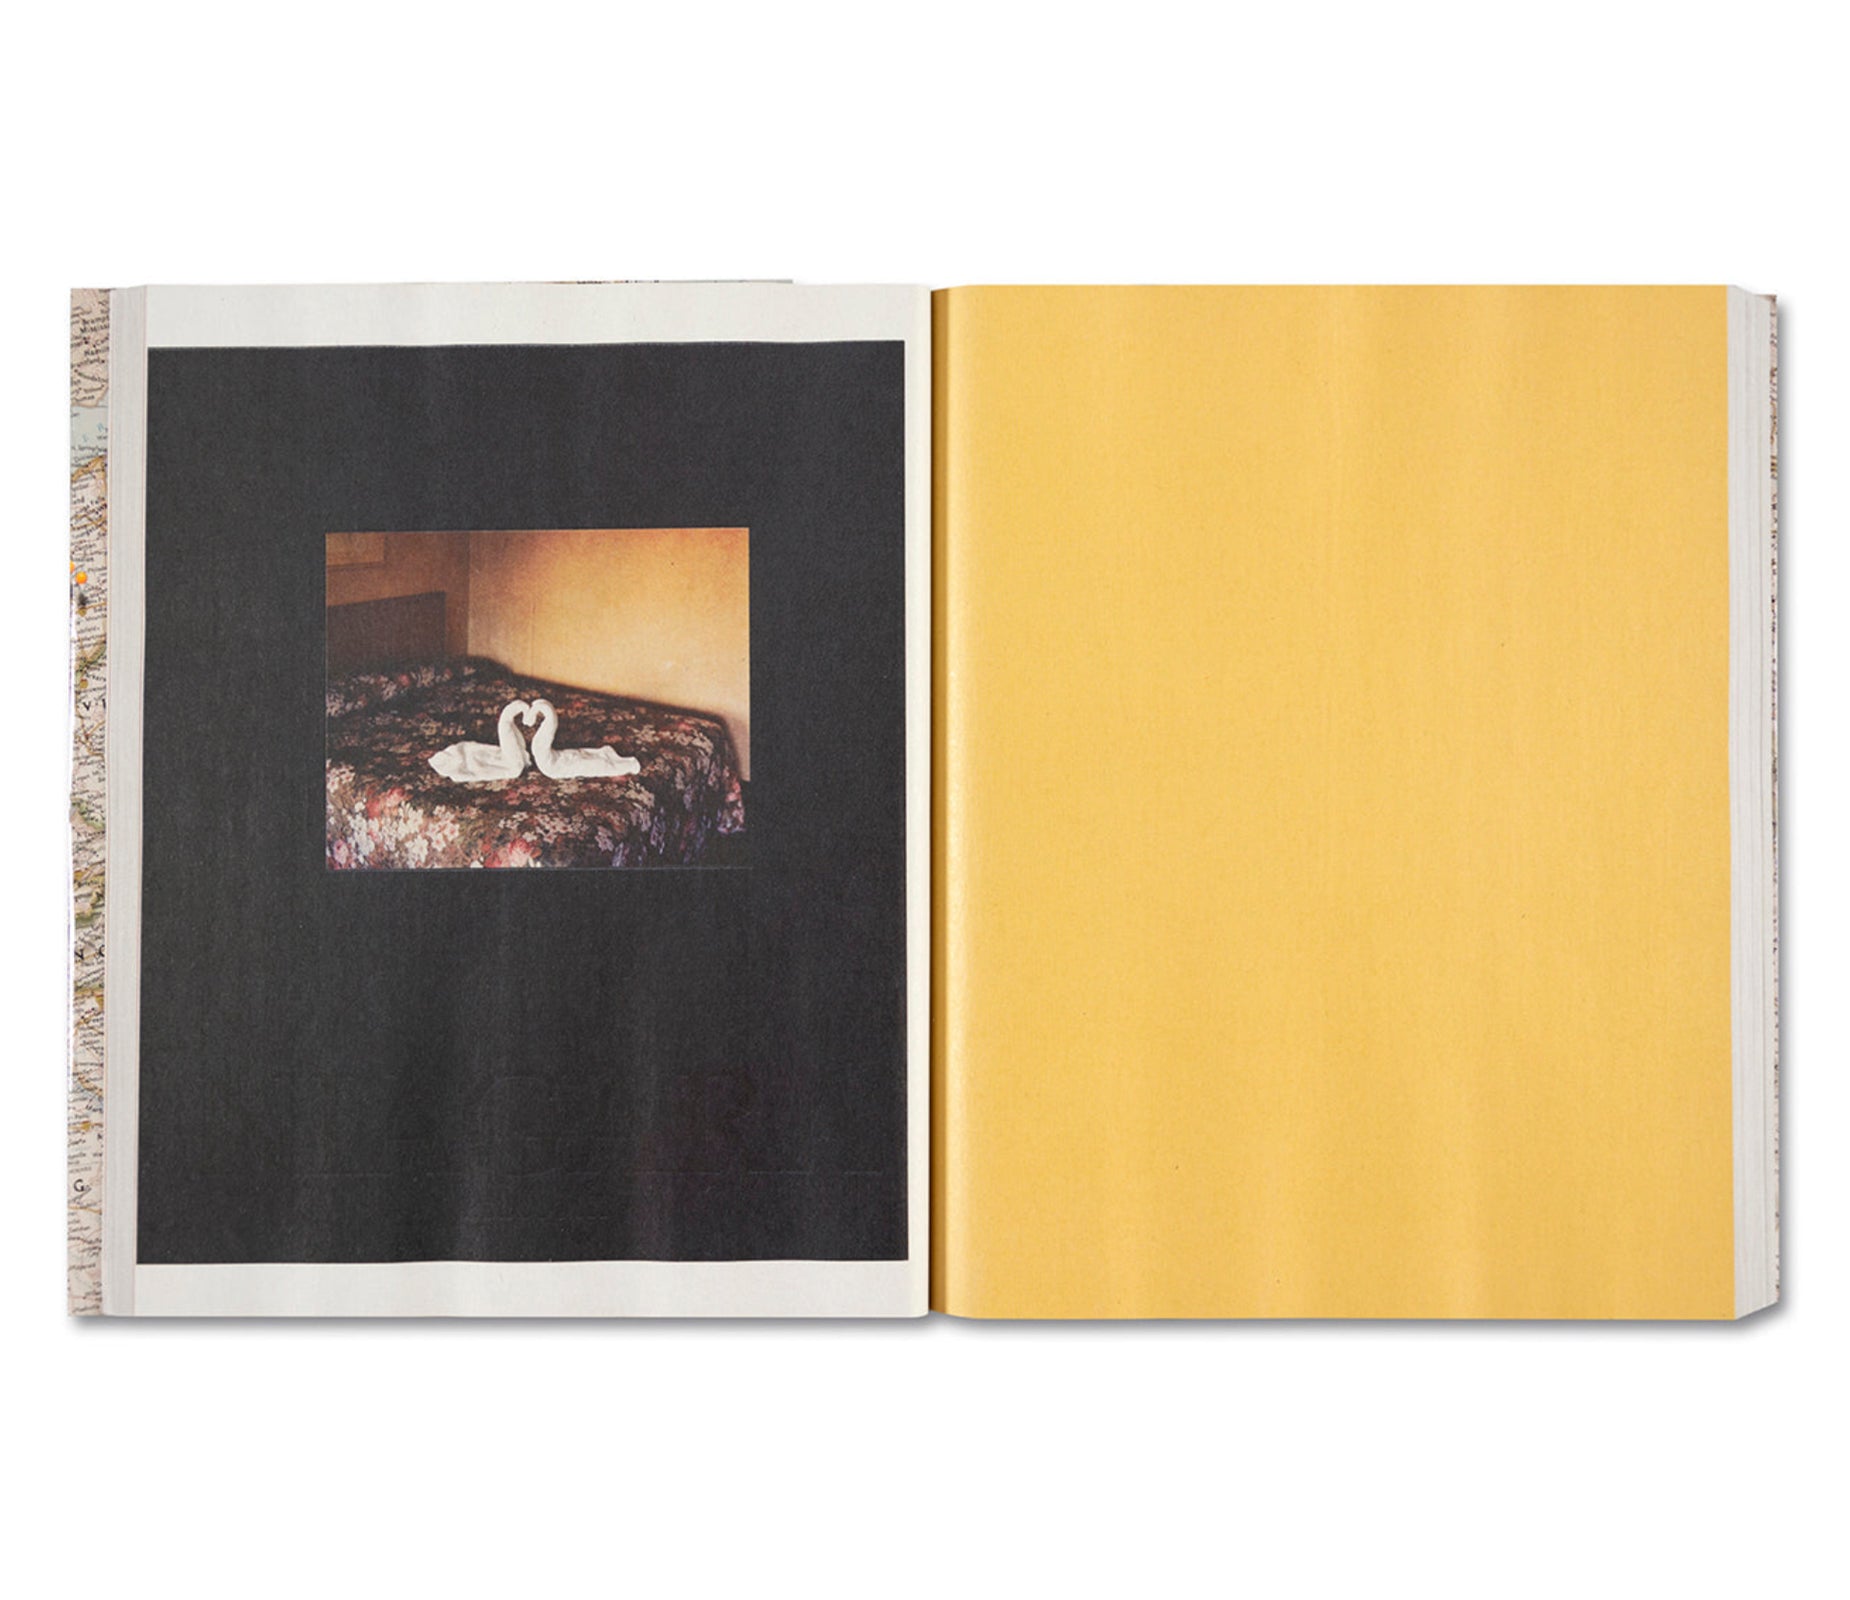 GATHERED LEAVES ANNOTATED by Alec Soth